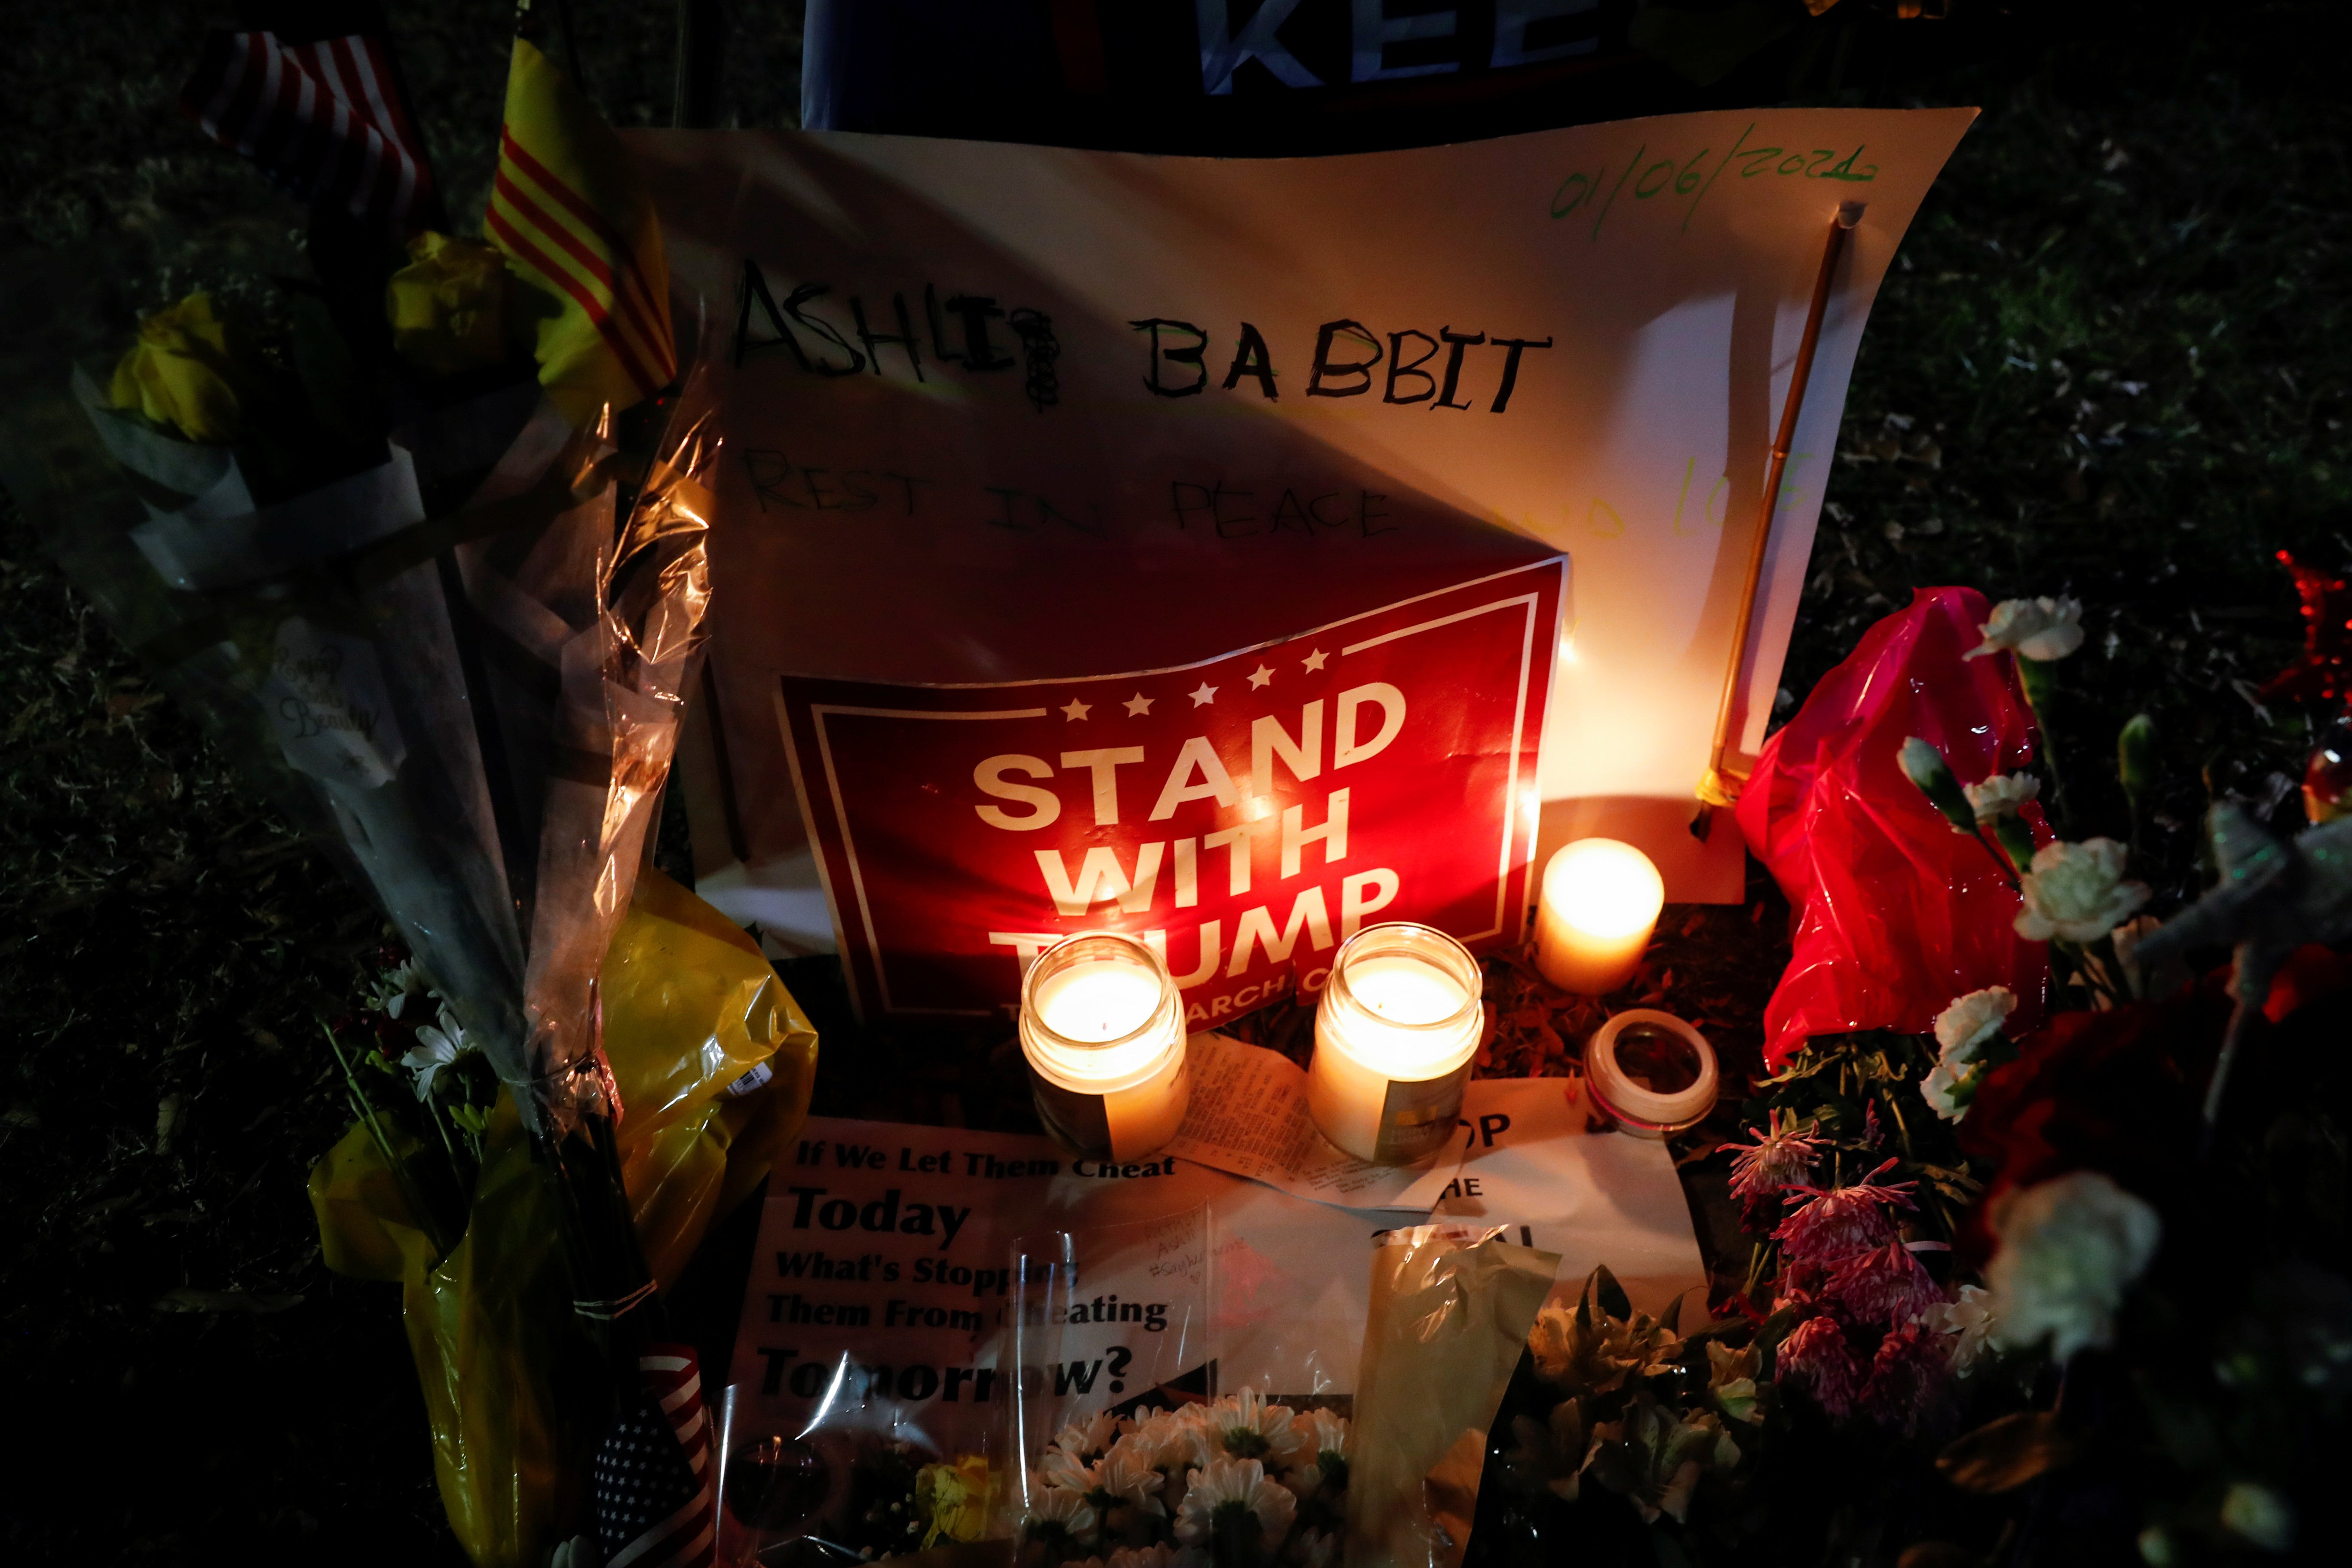 Flowers and candles are seen at a memorial for Ashli Babbitt, the woman who was shot dead at the U.S. Capitol after U.S. President Donald Trump's supporters stormed the building, in Washington, U.S. January 7, 2021.